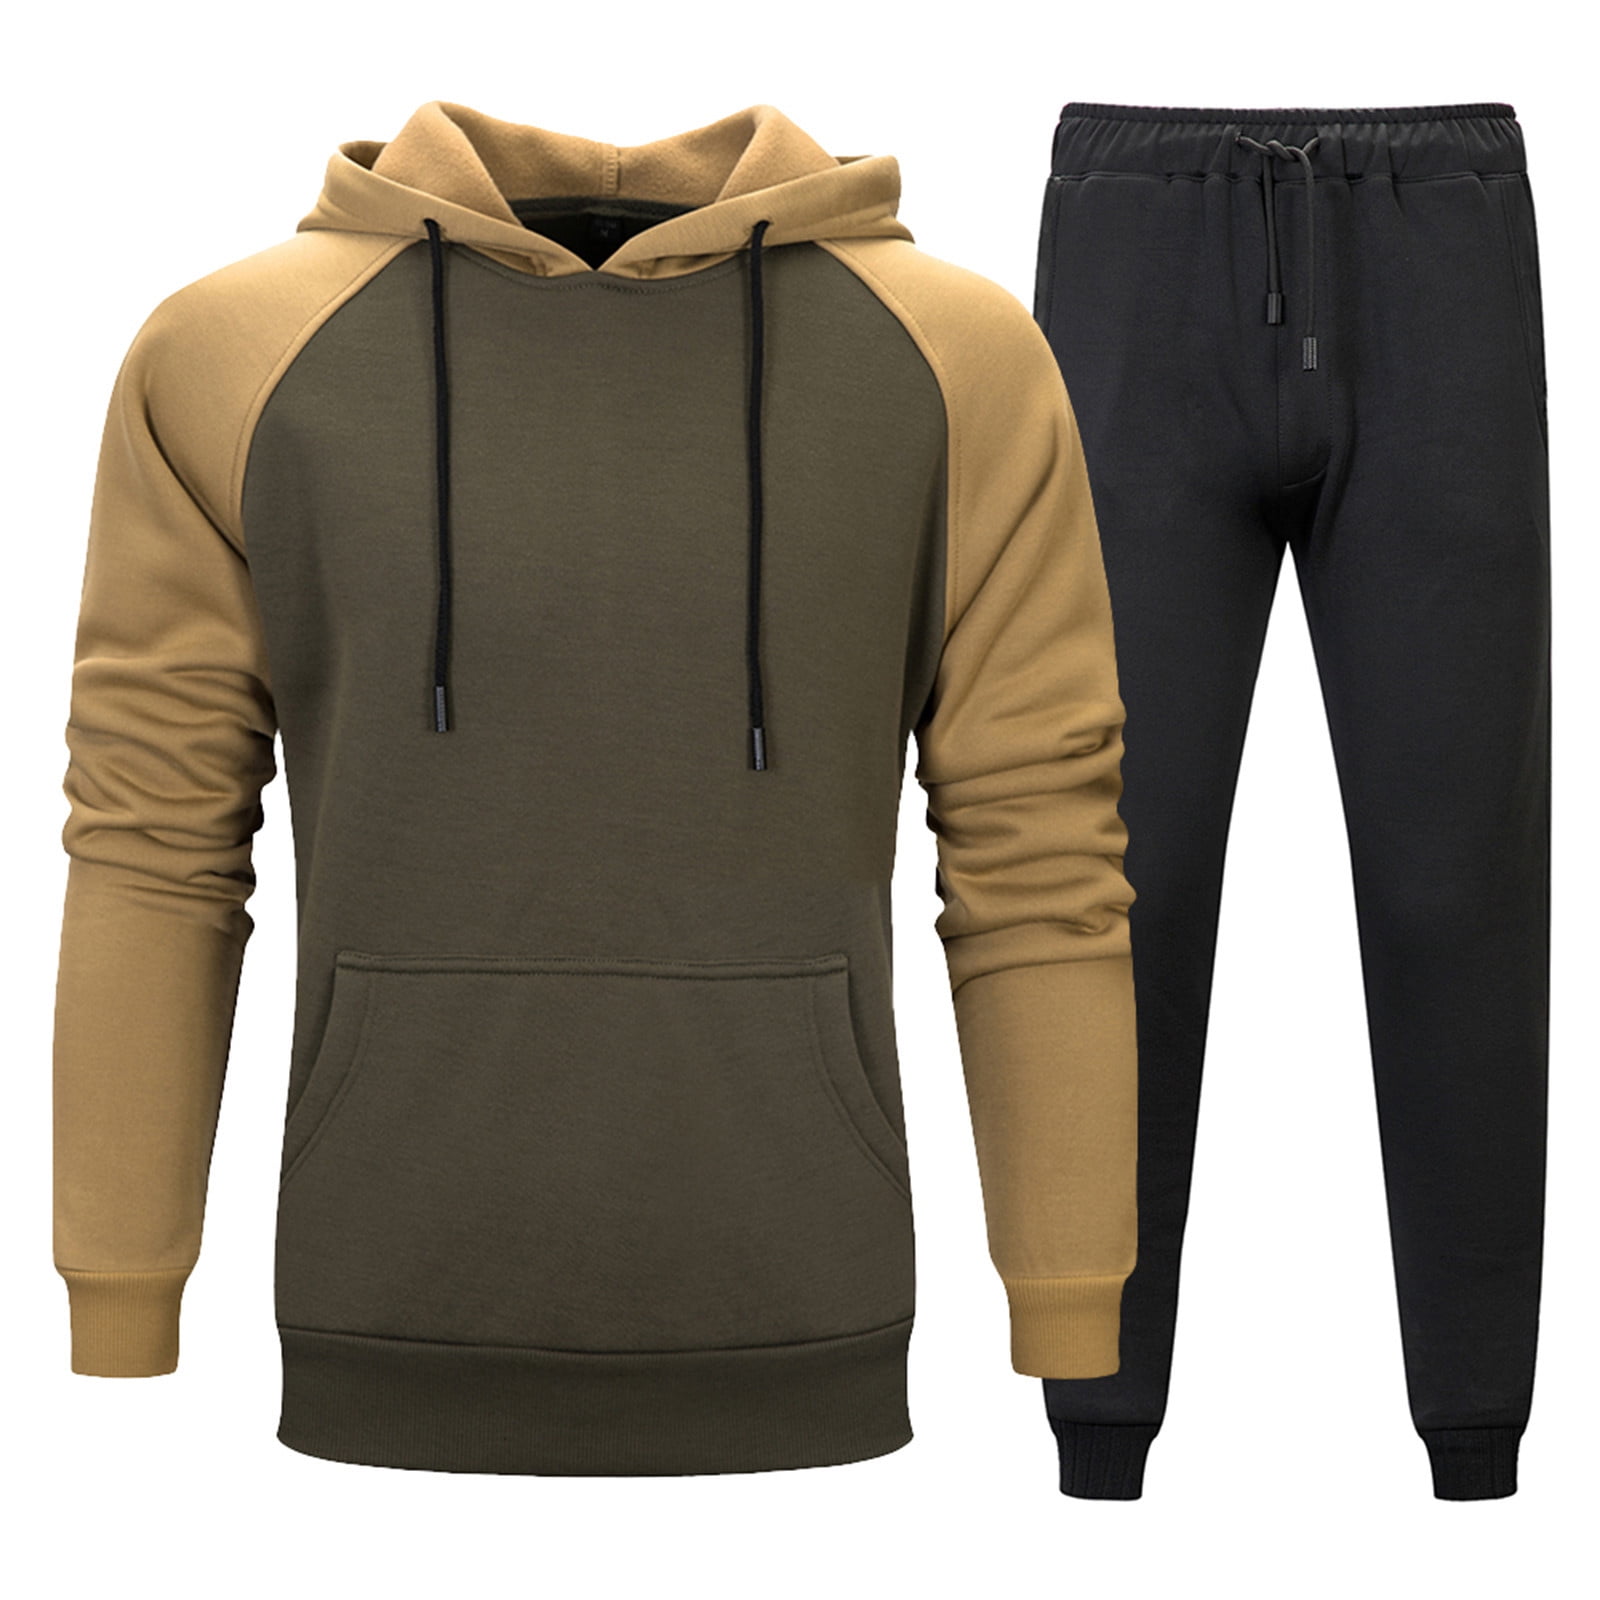 Stamzod Men'S Tracksuits 2 Piece Outfit Casual Long Sleeve Sweat Suit ...